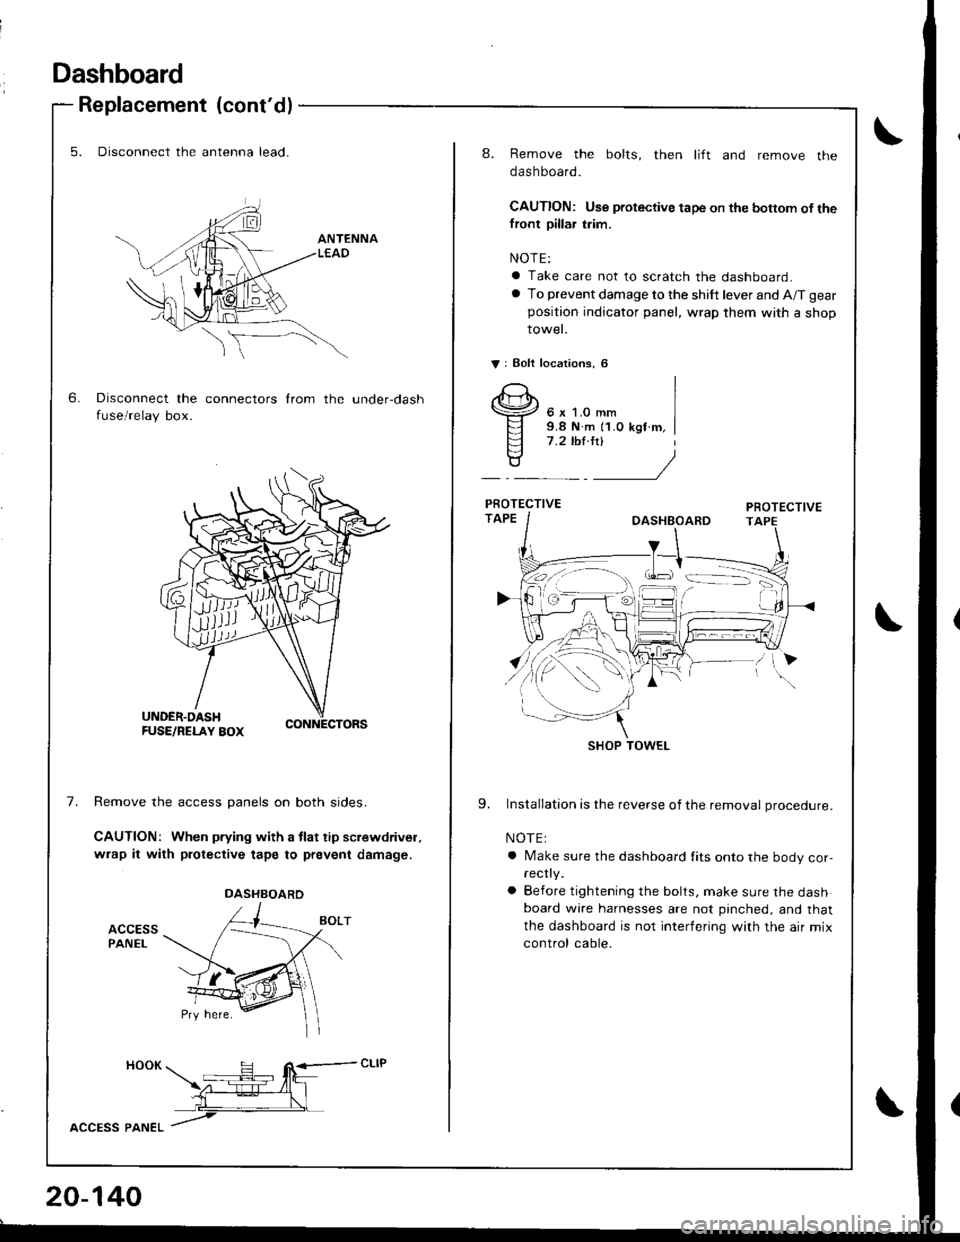 HONDA INTEGRA 1998 4.G Owners Guide Dashboard
6.
Replacement (contdl
5. Disconnect the antenna lead.
Disconnect the connectors from the under-dash
fuse/relay box.
7.Remove the access panels on both sides.
CAUTION: When pfying with a tl